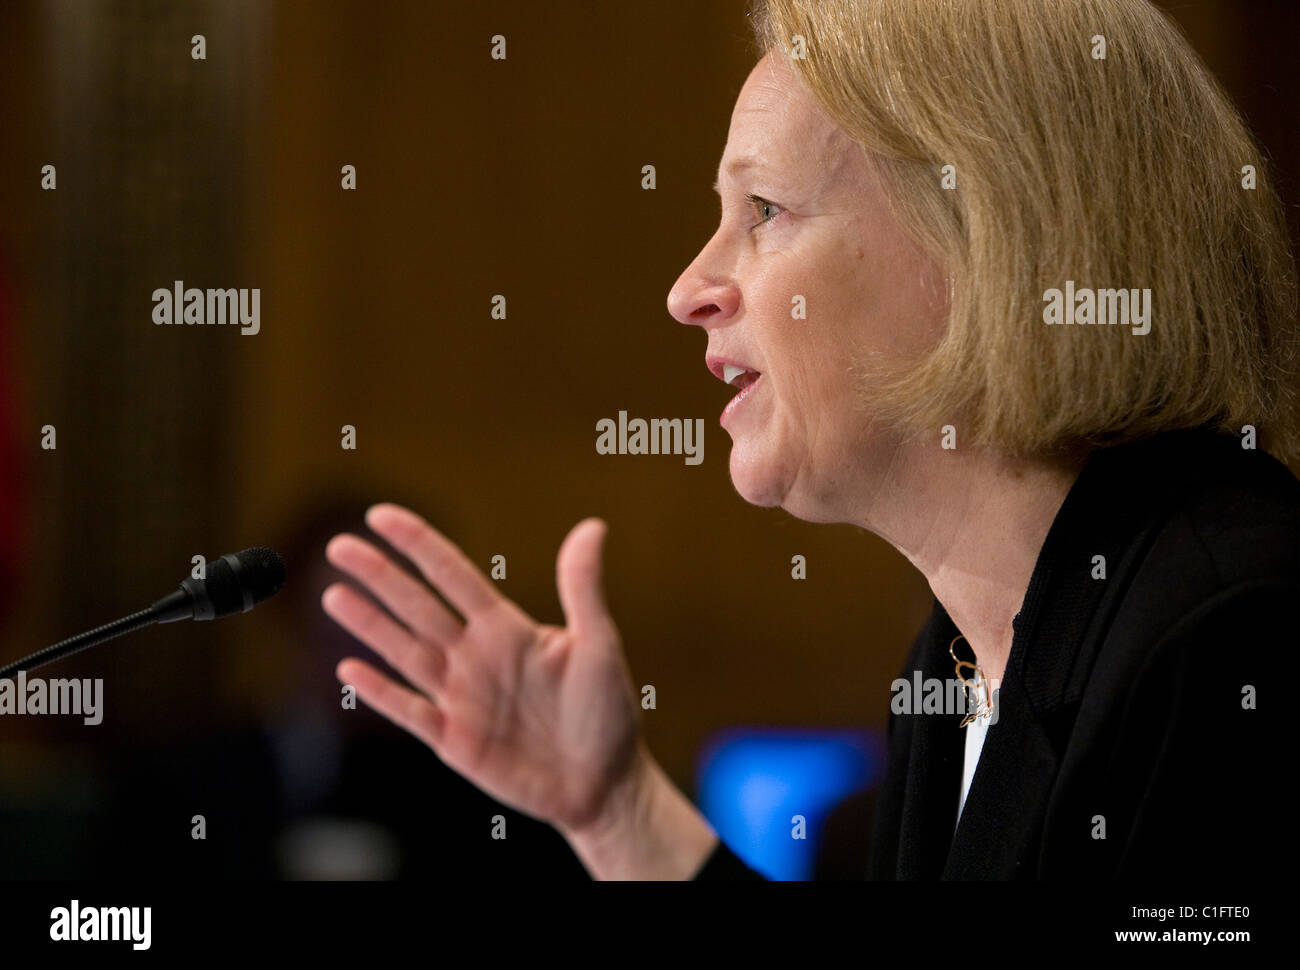 Mary Schapiro, Chairwoman of the Securities and Exchange Commission (SEC) Stock Photo